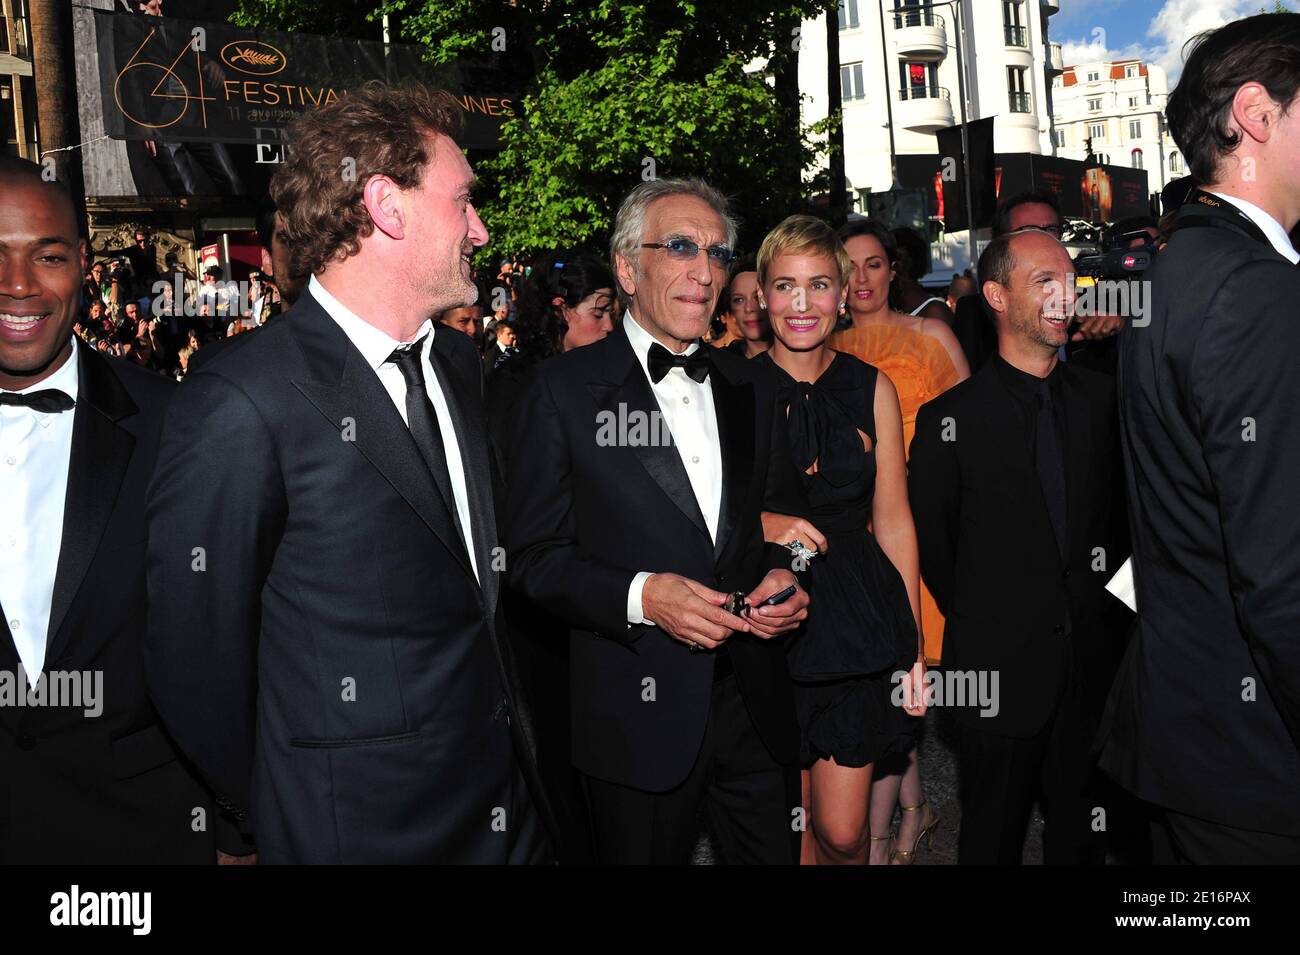 (L-R) Jean-Paul Rouve, Gerard Darmon and Judith Godreche arriving for the screening of 'The Artist' presented in competition in the Feature Films section as part of the 64th Cannes International Film Festival, at the Palais des Festivals in Cannes, southern France on May 15, 2011. Photo by Hahn-Nebinger-Genin/ABACAPRESS.COM Stock Photo